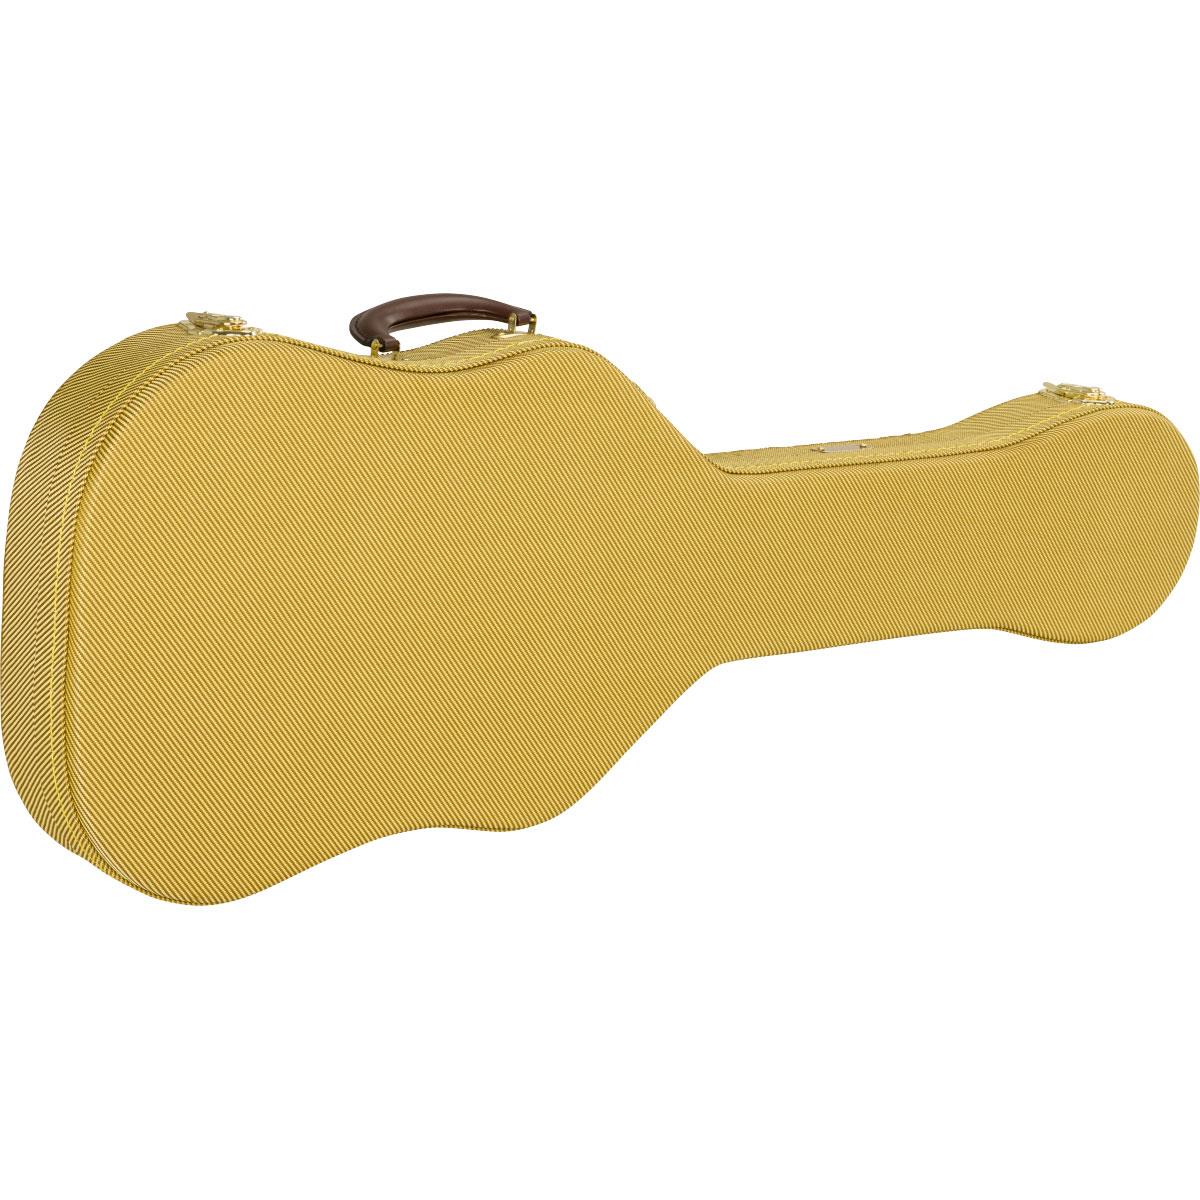 Image of Fender Telecaster Thermometer Case